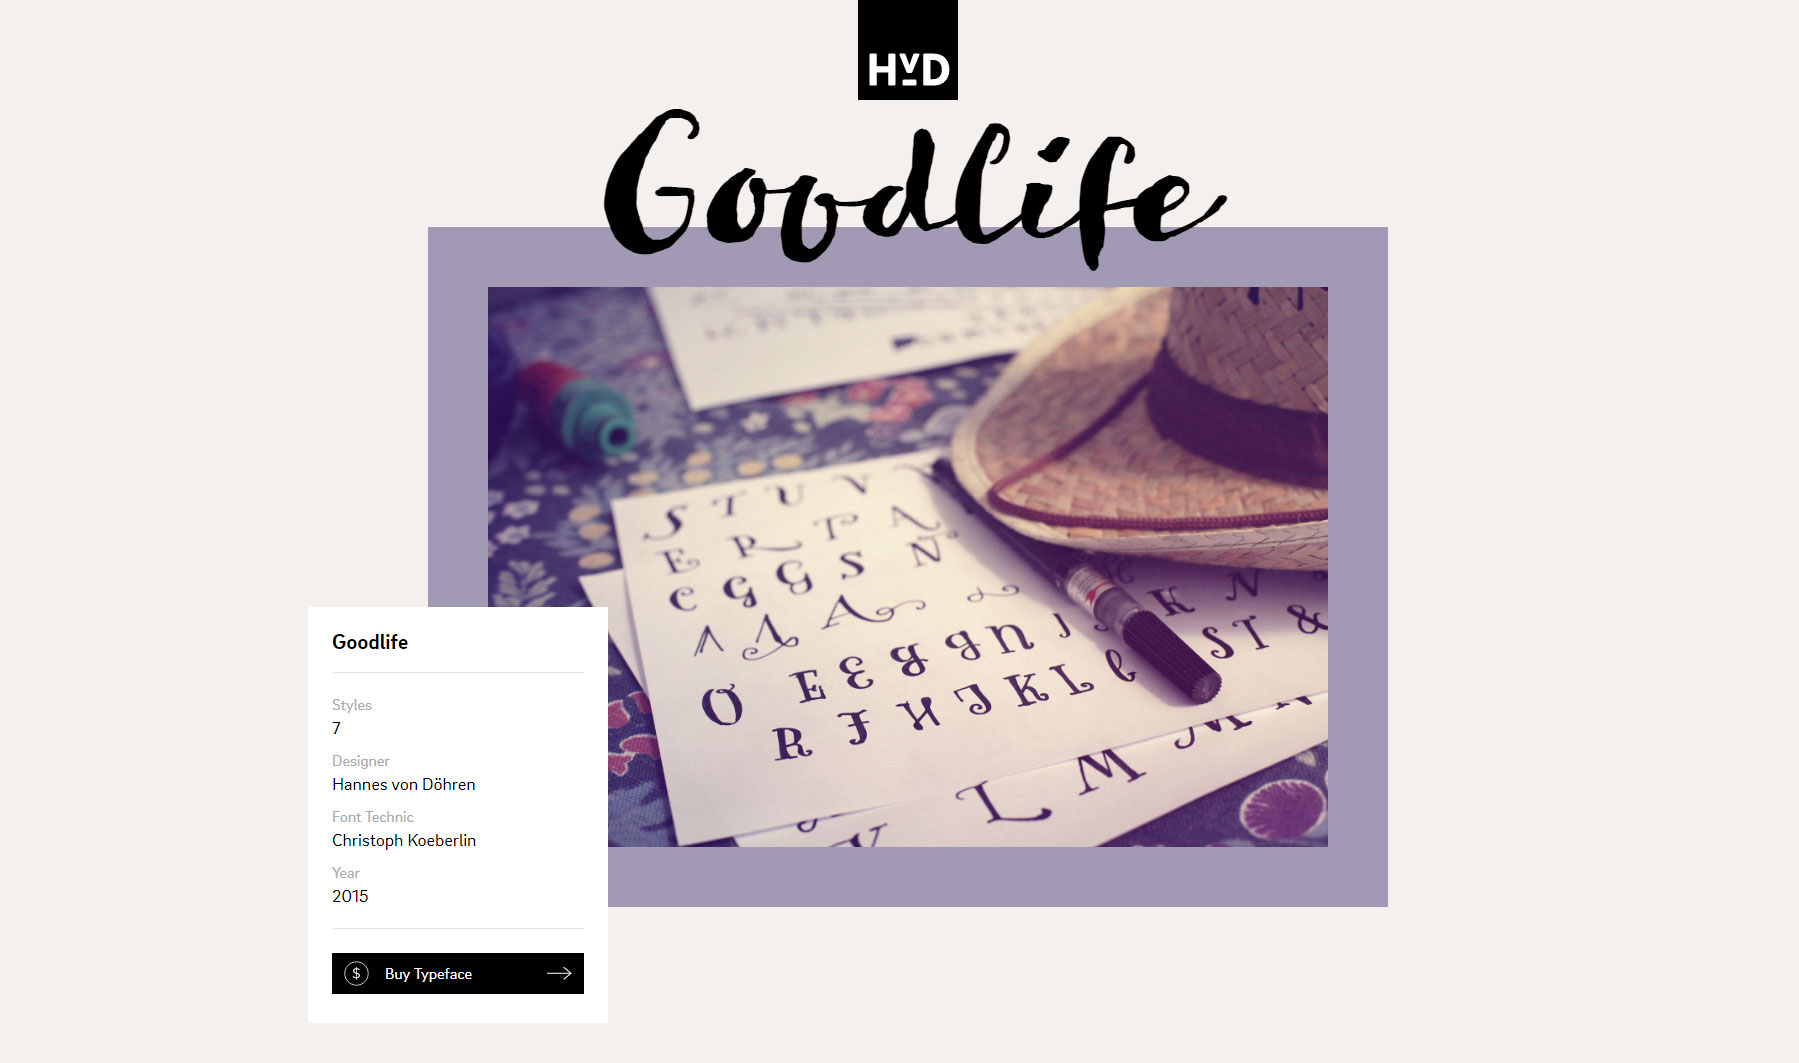 HvD Fonts - Website of the Day